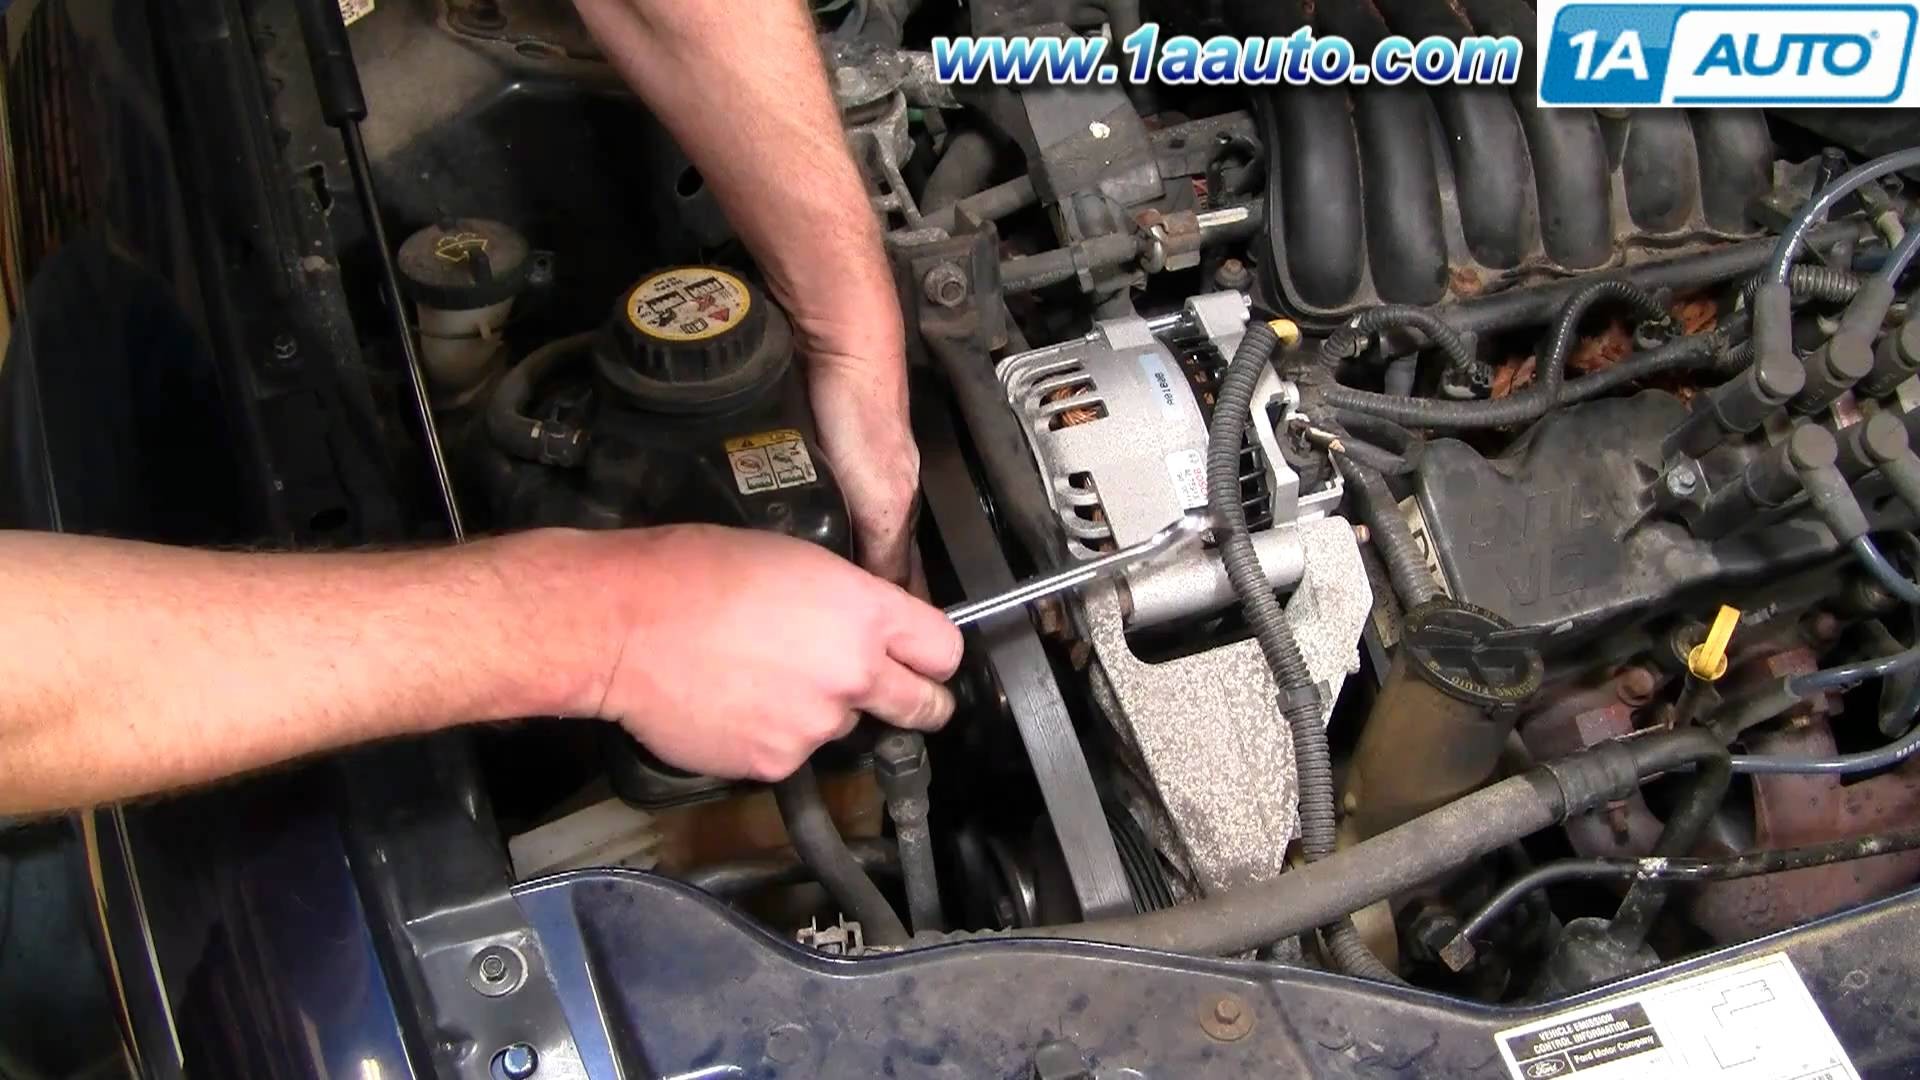 98 ford Taurus Engine Diagram How to Install Replace Serpentine Belt Idler Pulley ford Taurus 3 0l